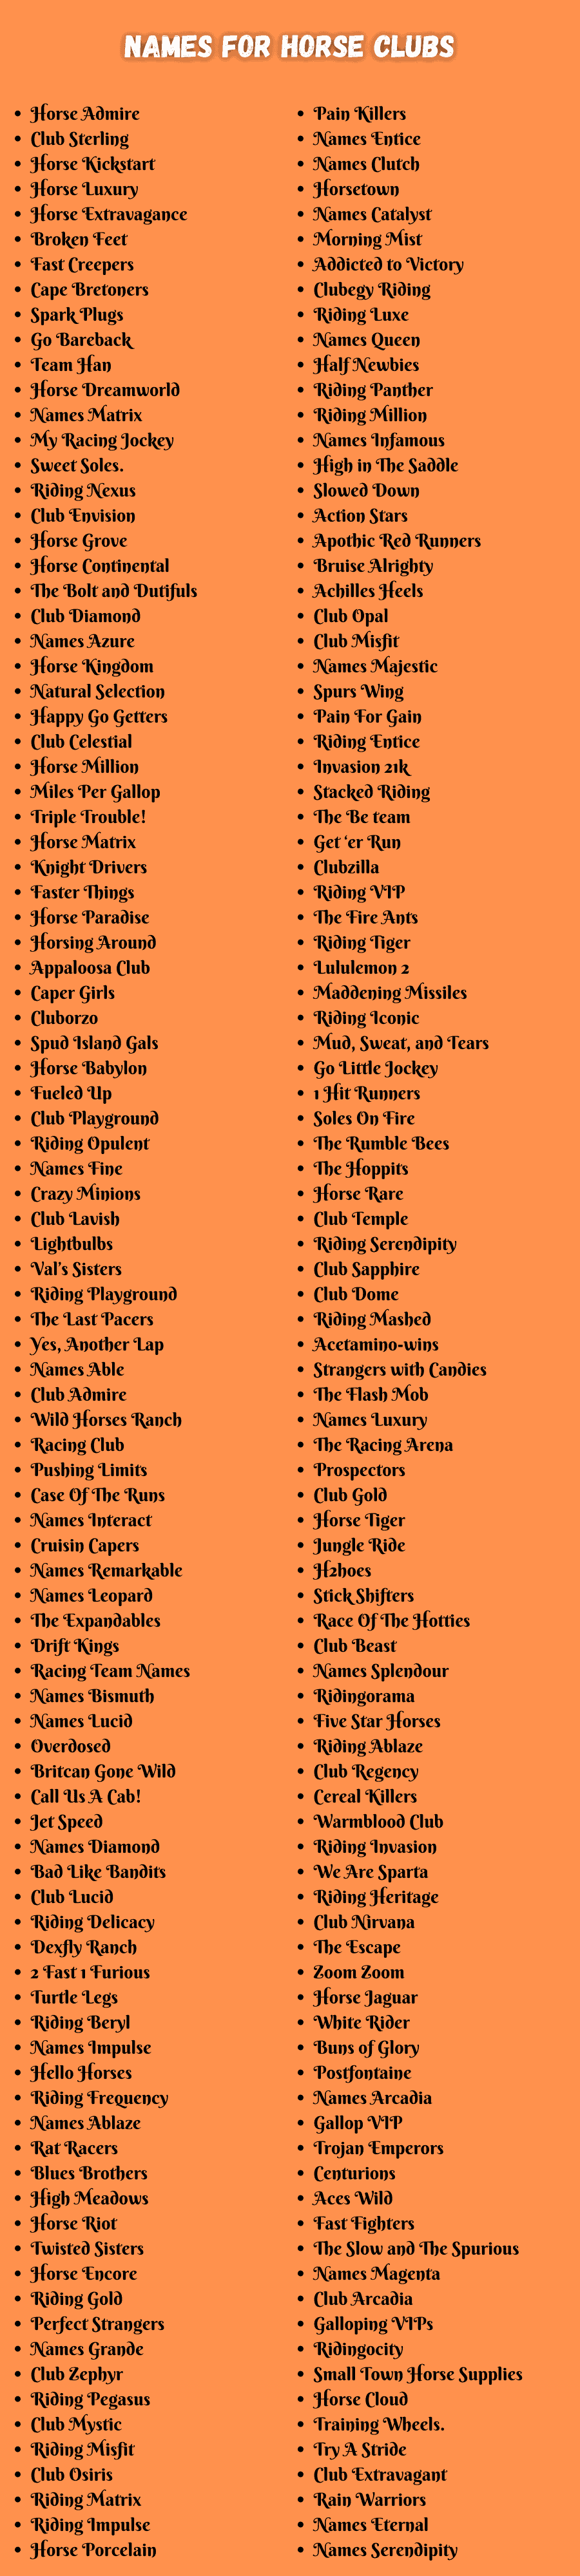 Names for Horse Clubs